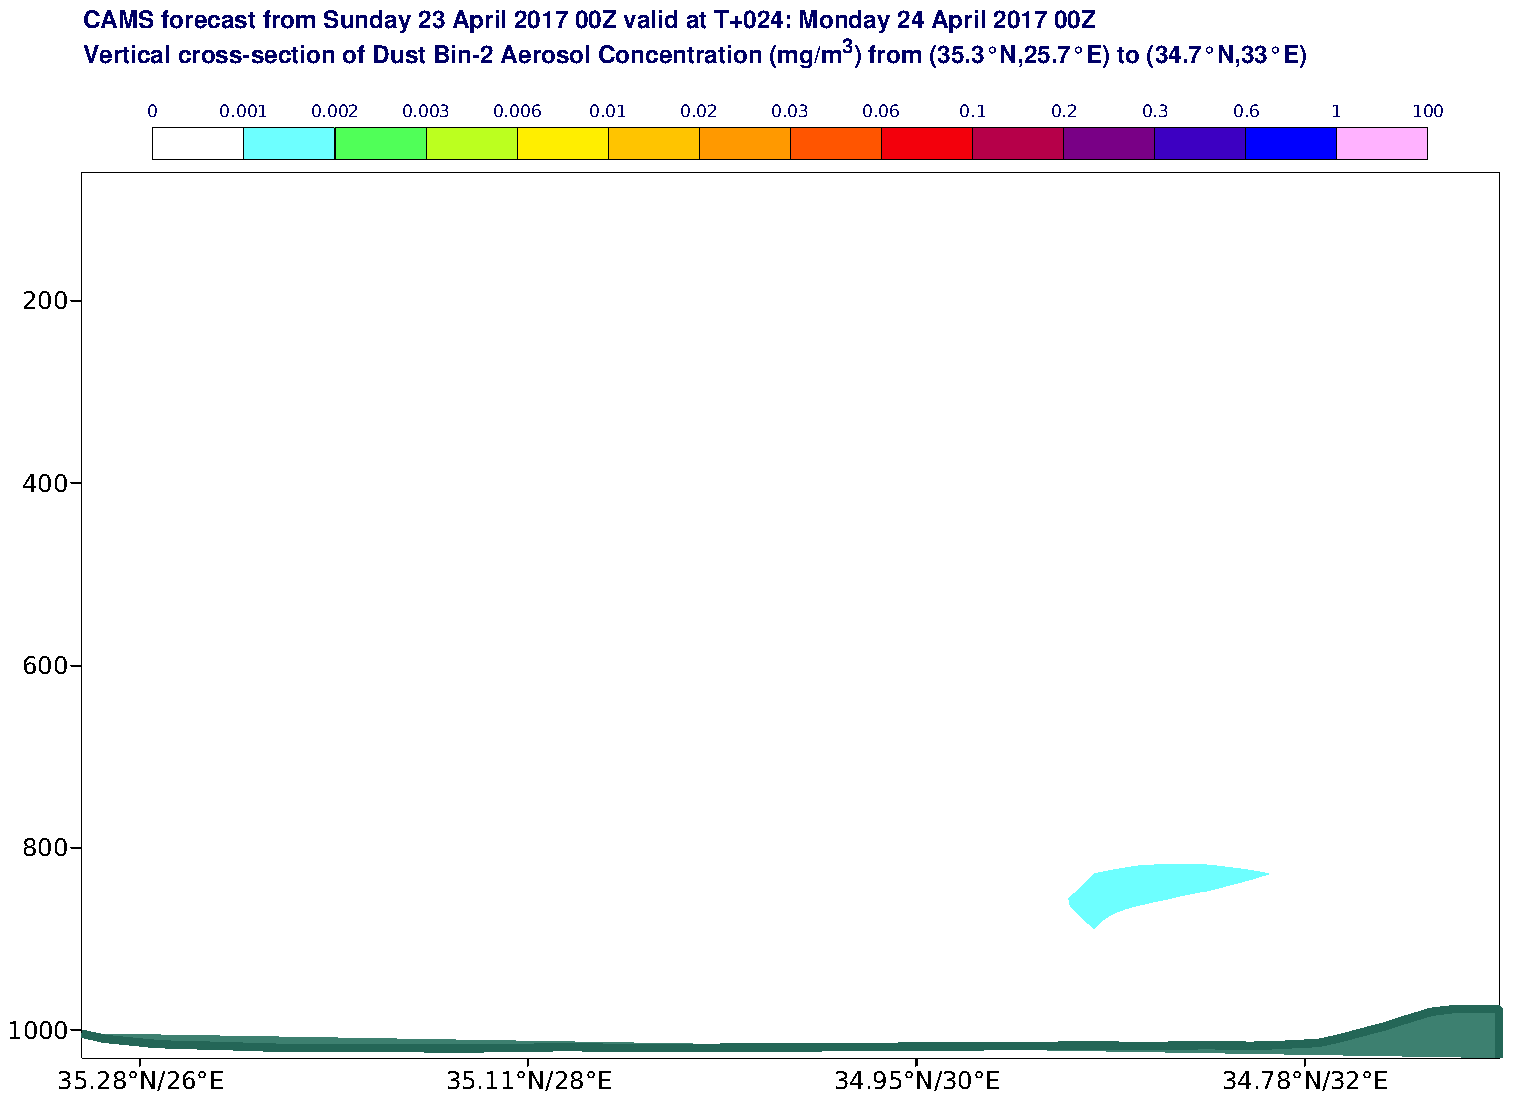 Vertical cross-section of Dust Bin-2 Aerosol Concentration (mg/m3) valid at T24 - 2017-04-24 00:00